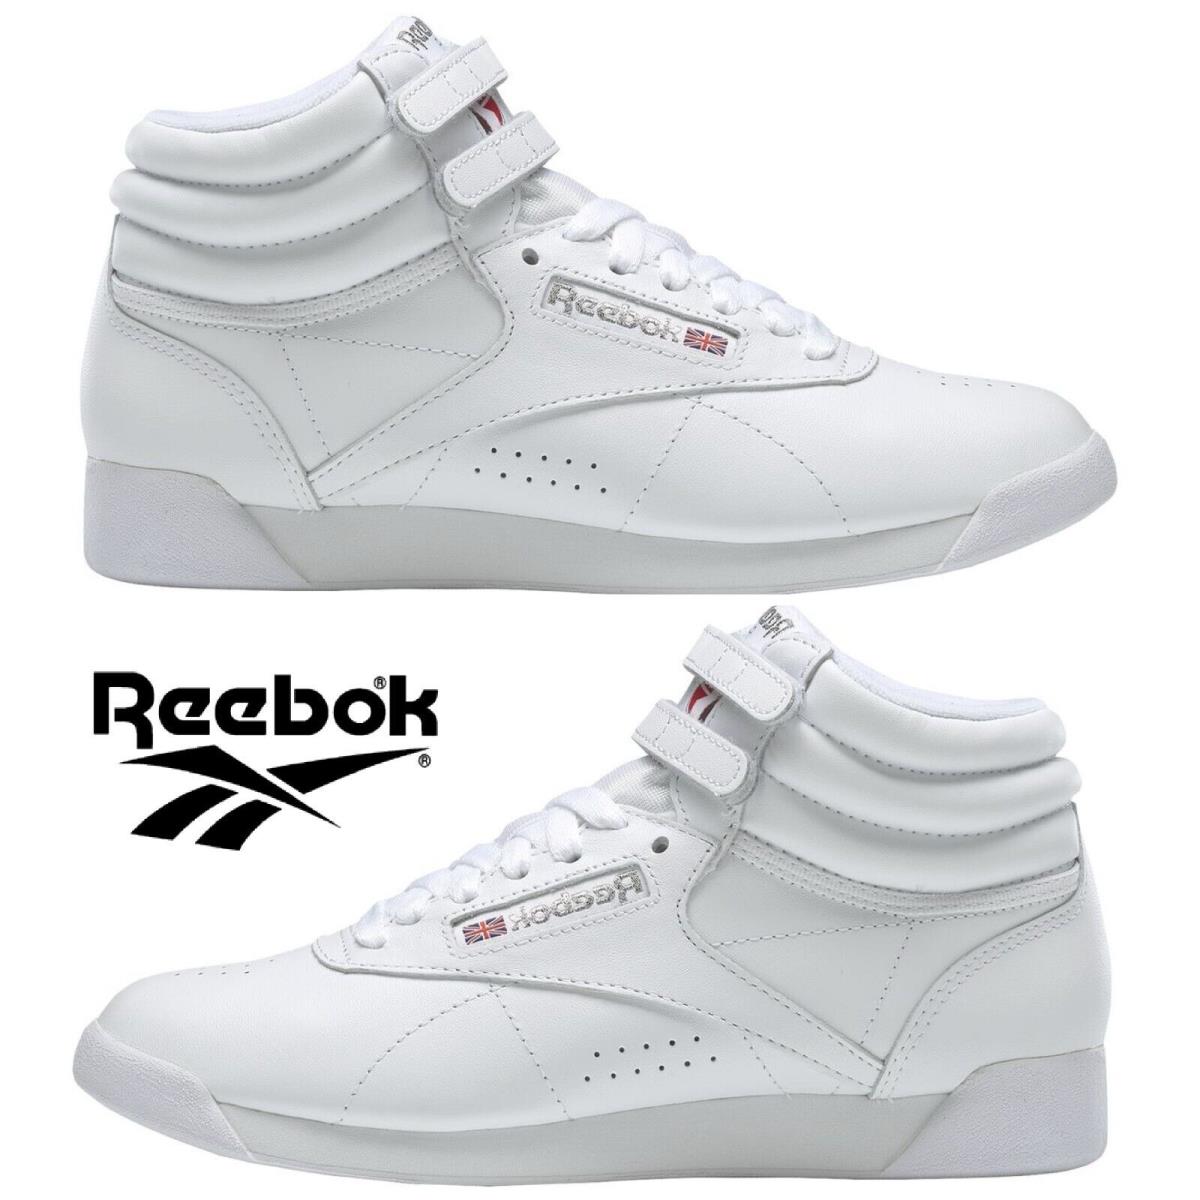 Reebok Freestyle HI Women`s Sneakers Sport Workout Casual Shoes White